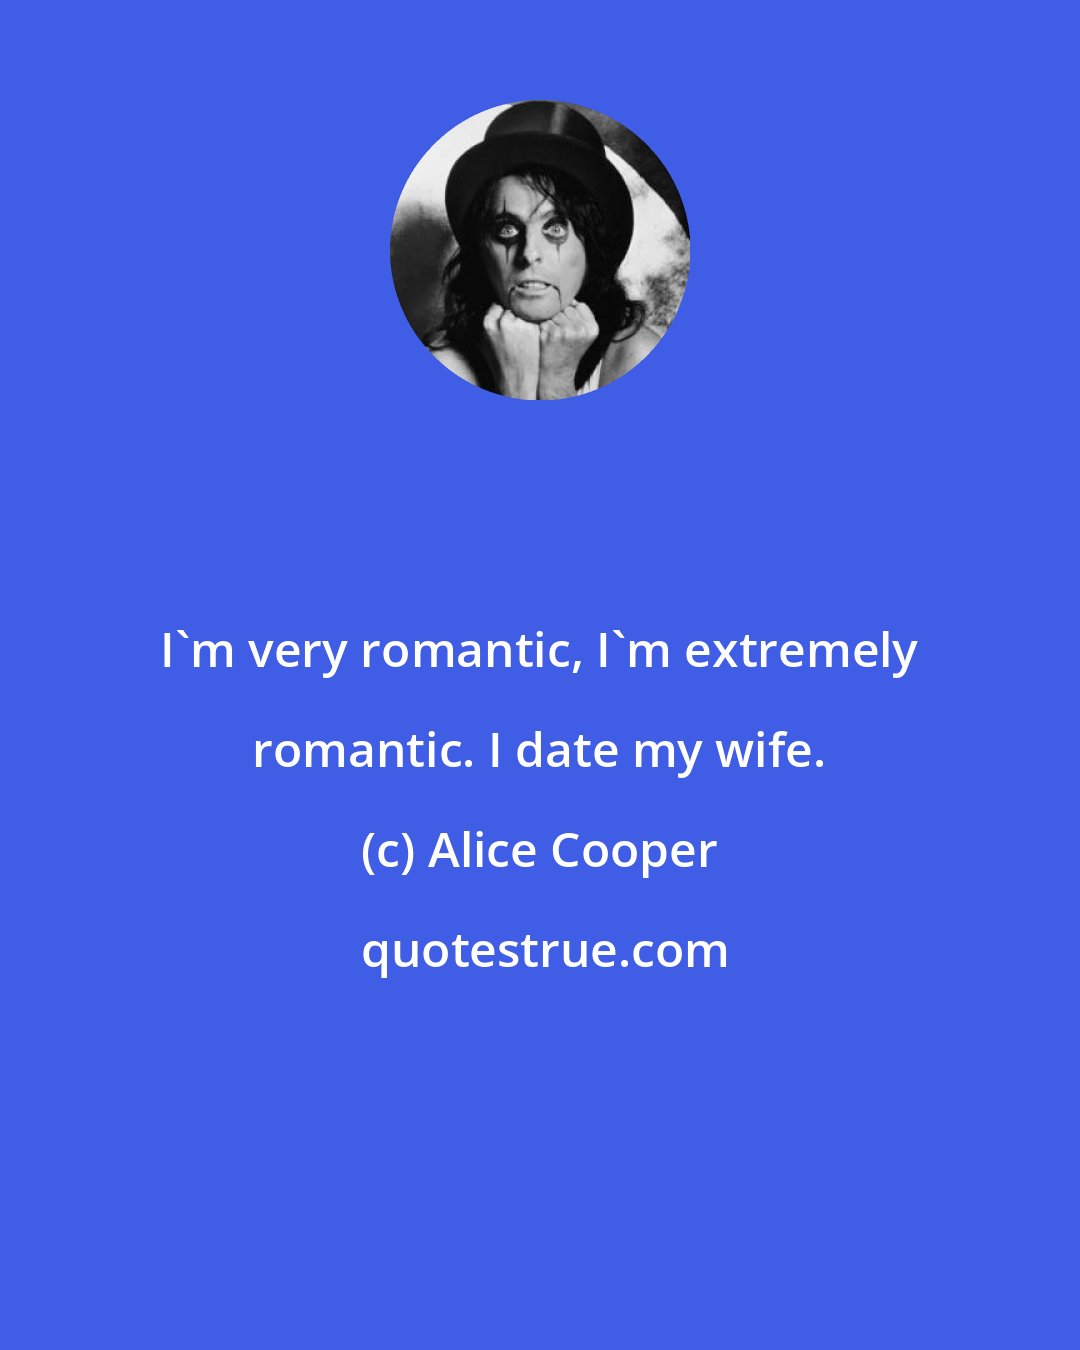 Alice Cooper: I'm very romantic, I'm extremely romantic. I date my wife.